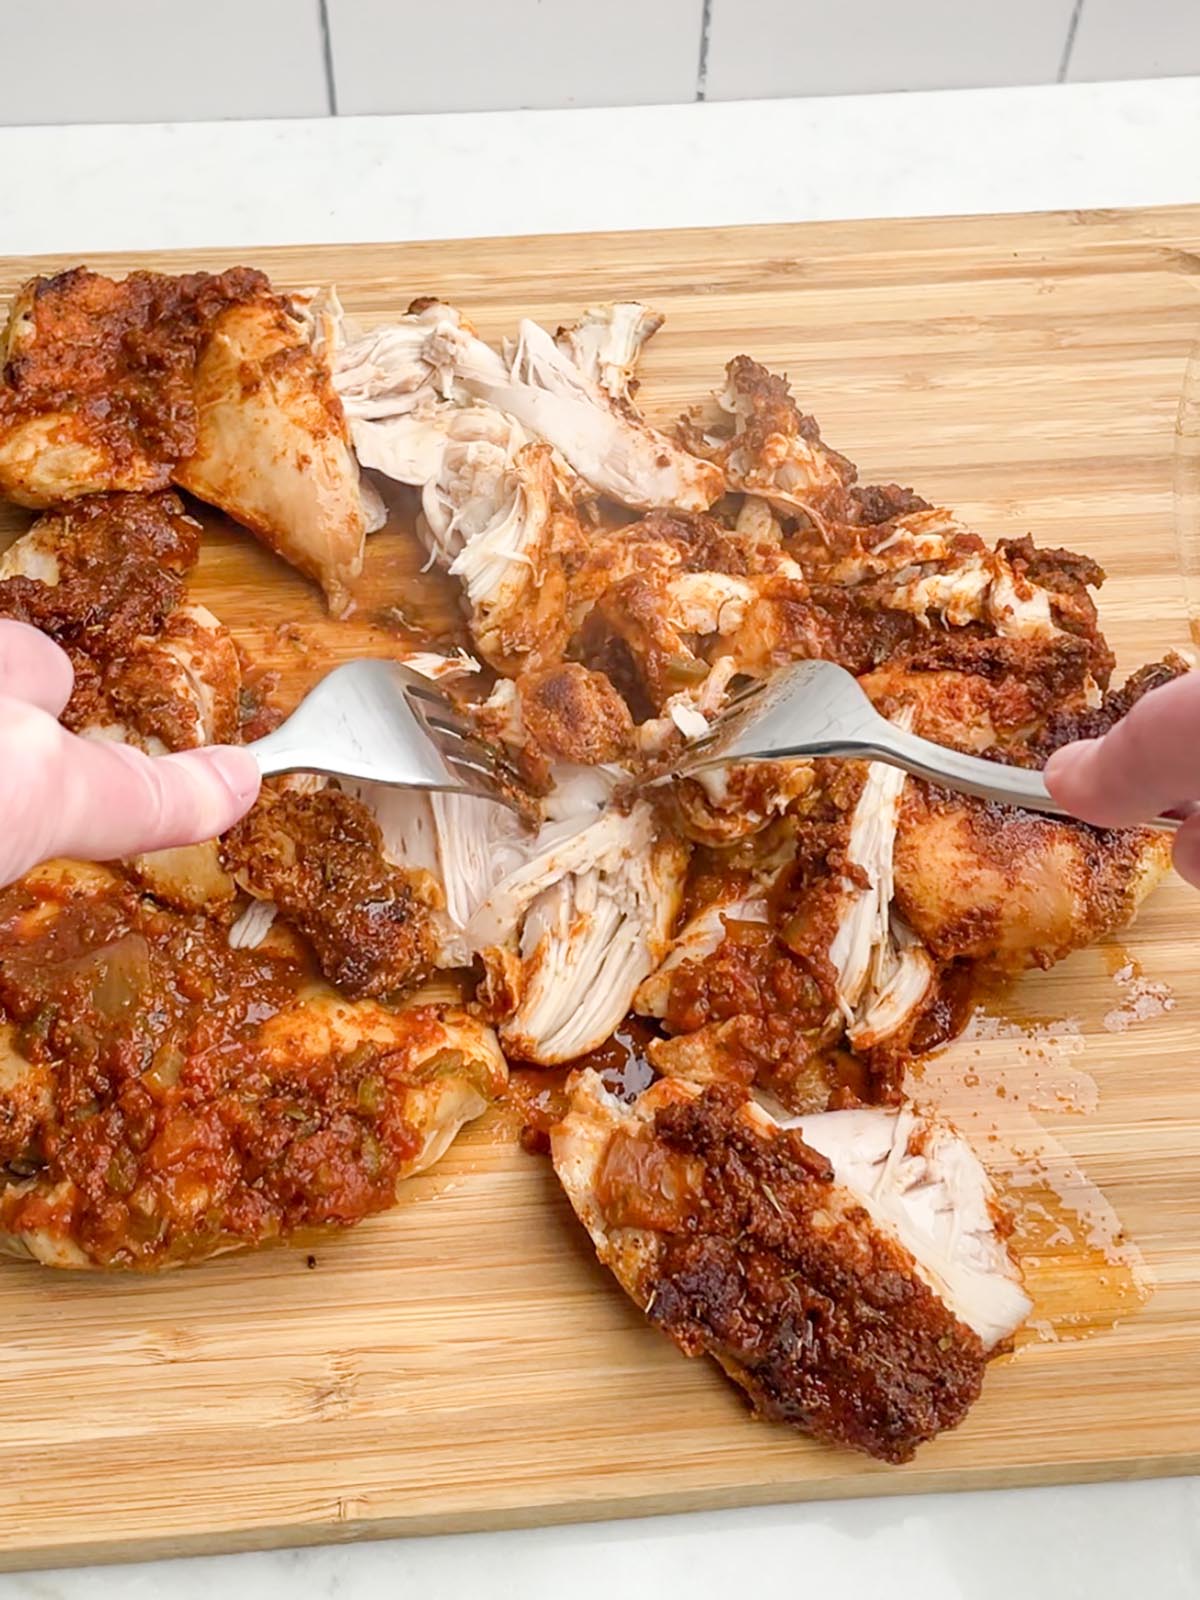 two hands holding forks shredding cooked salsa chicken on a wooden cutting board